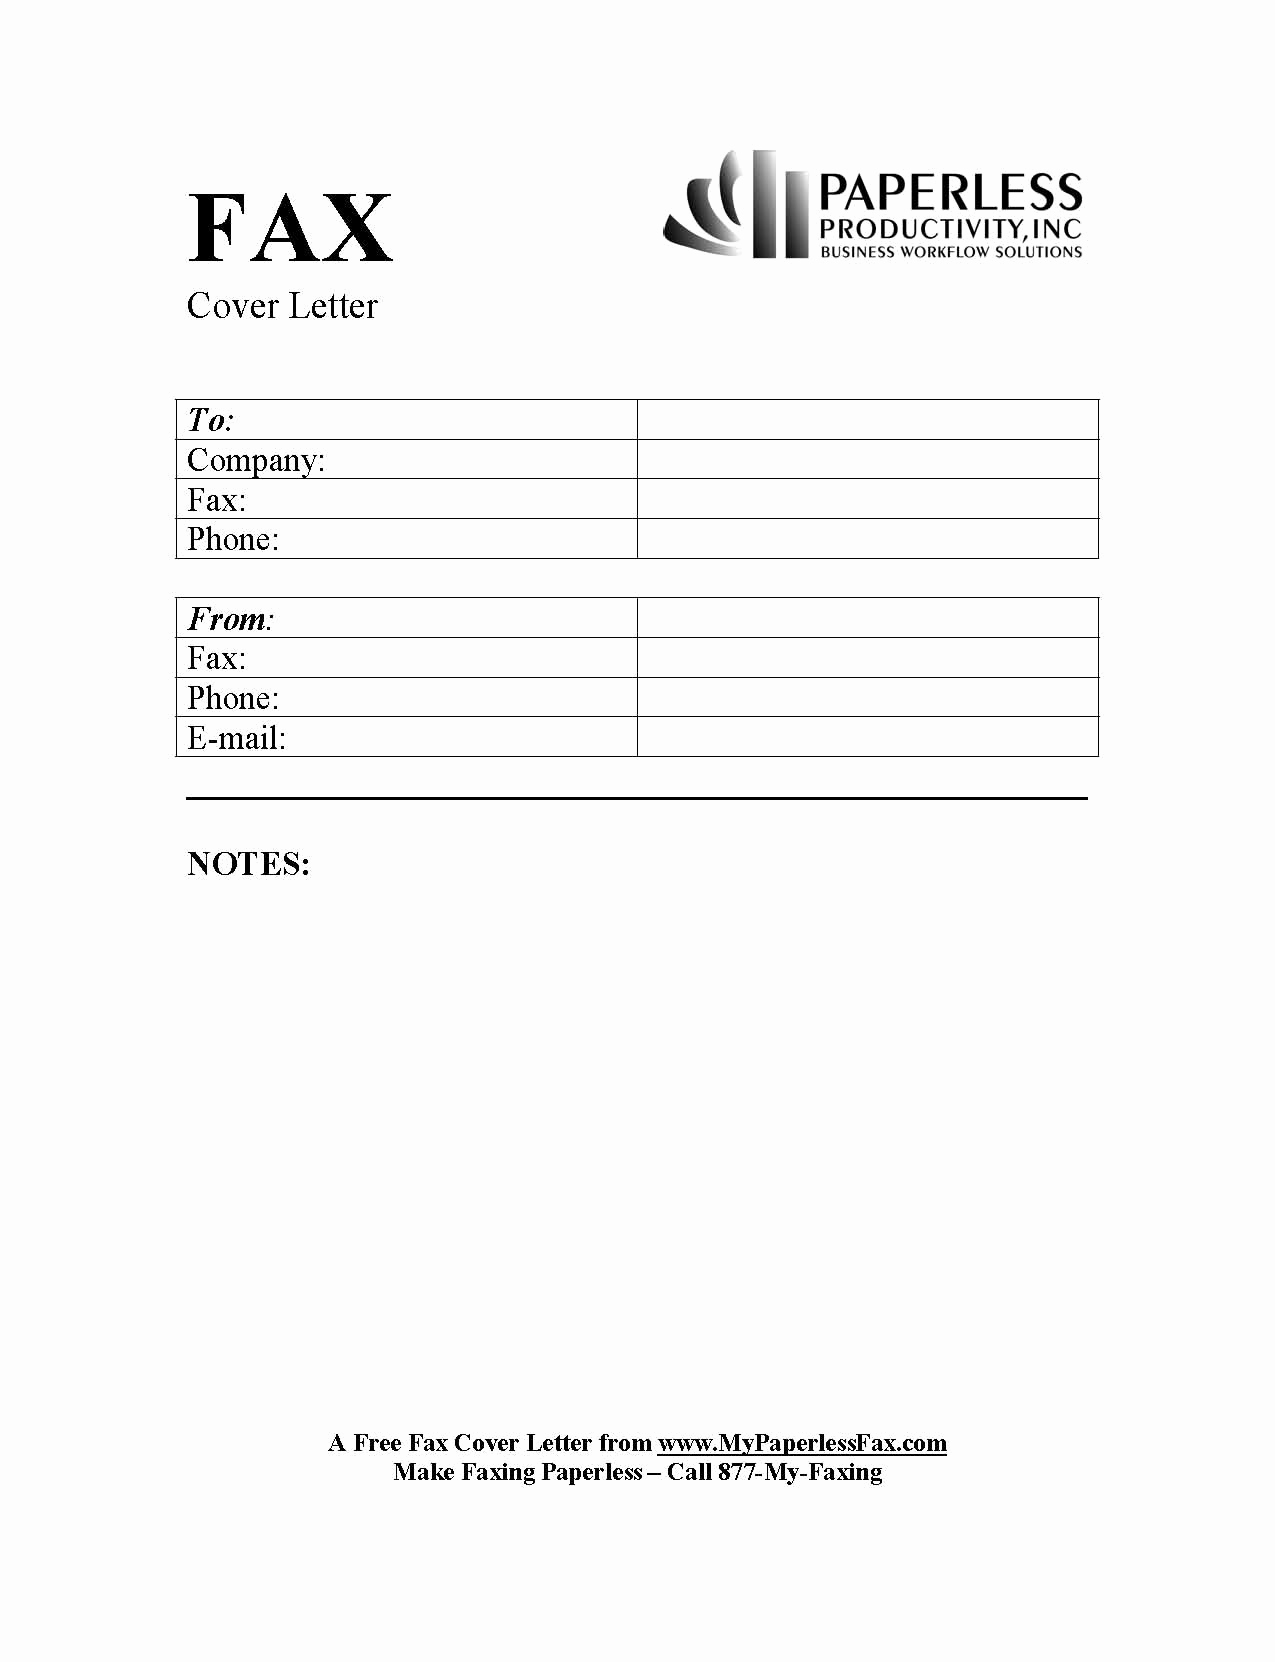 Fax Cover Letter Sample Awesome Template for Fax Cover Sheet